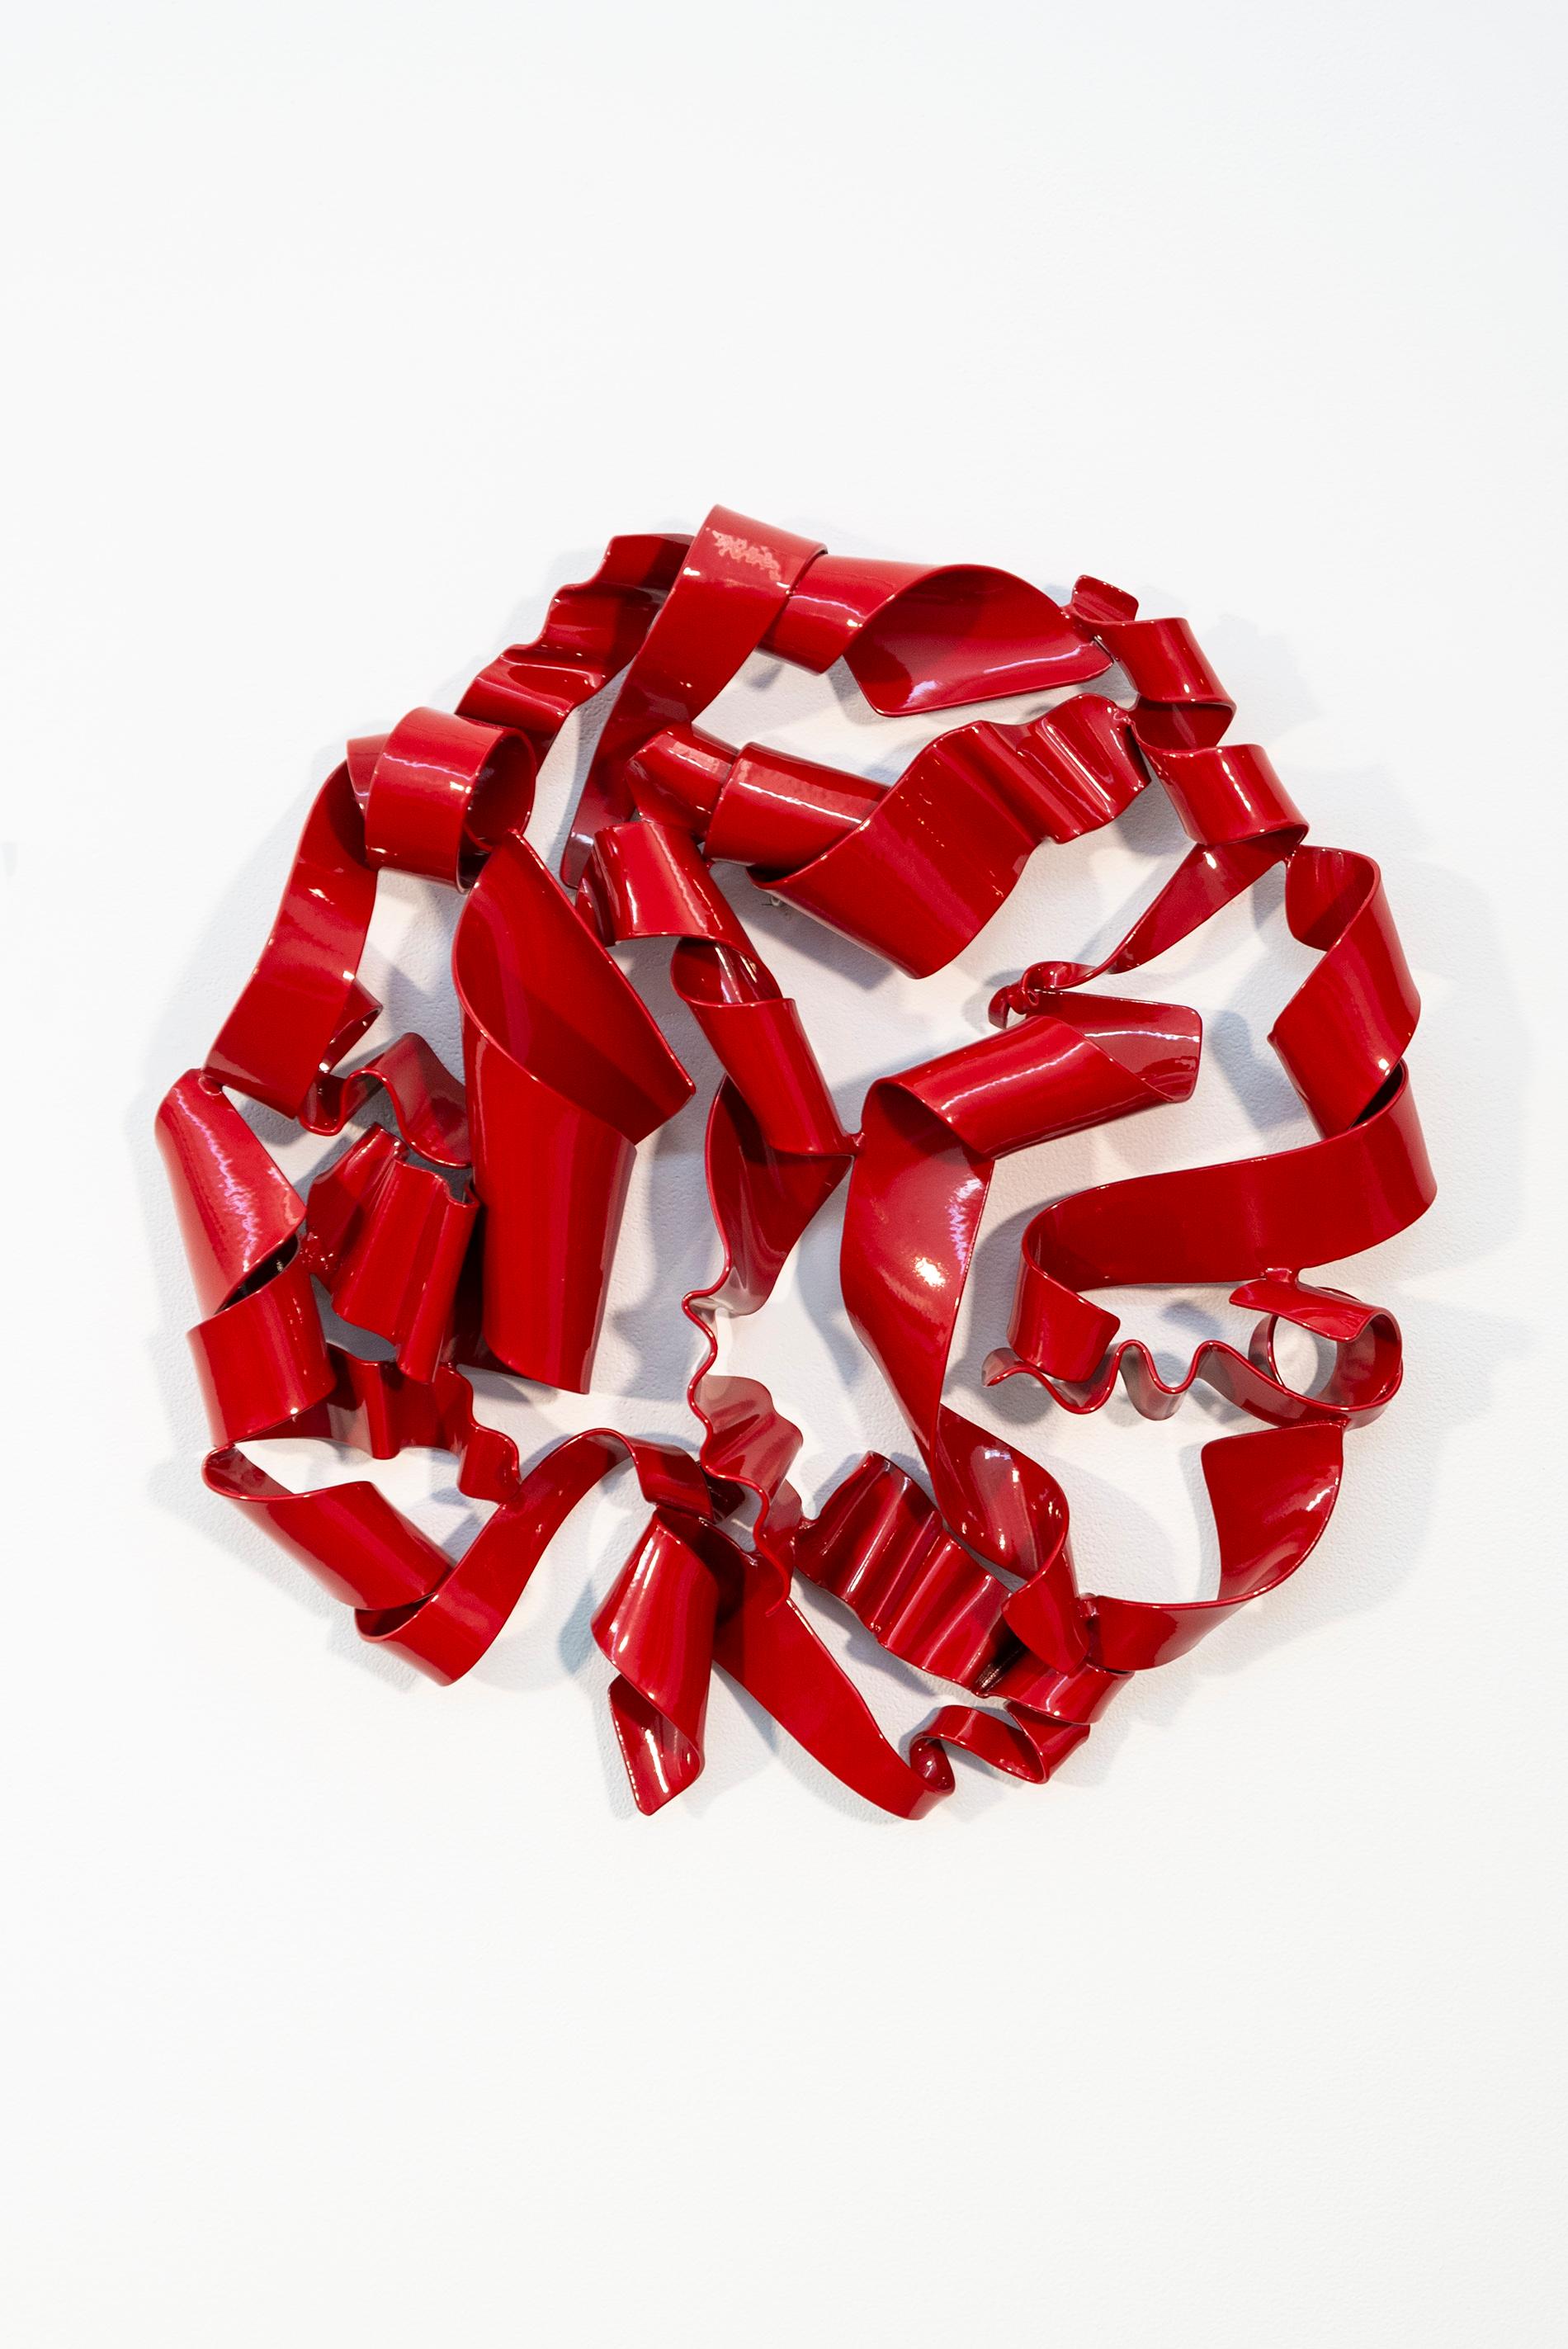 Stefan Duerst Abstract Sculpture - Tabula Rasa 1 - red, contemporary, abstract, powder coated steel, wall sculpture